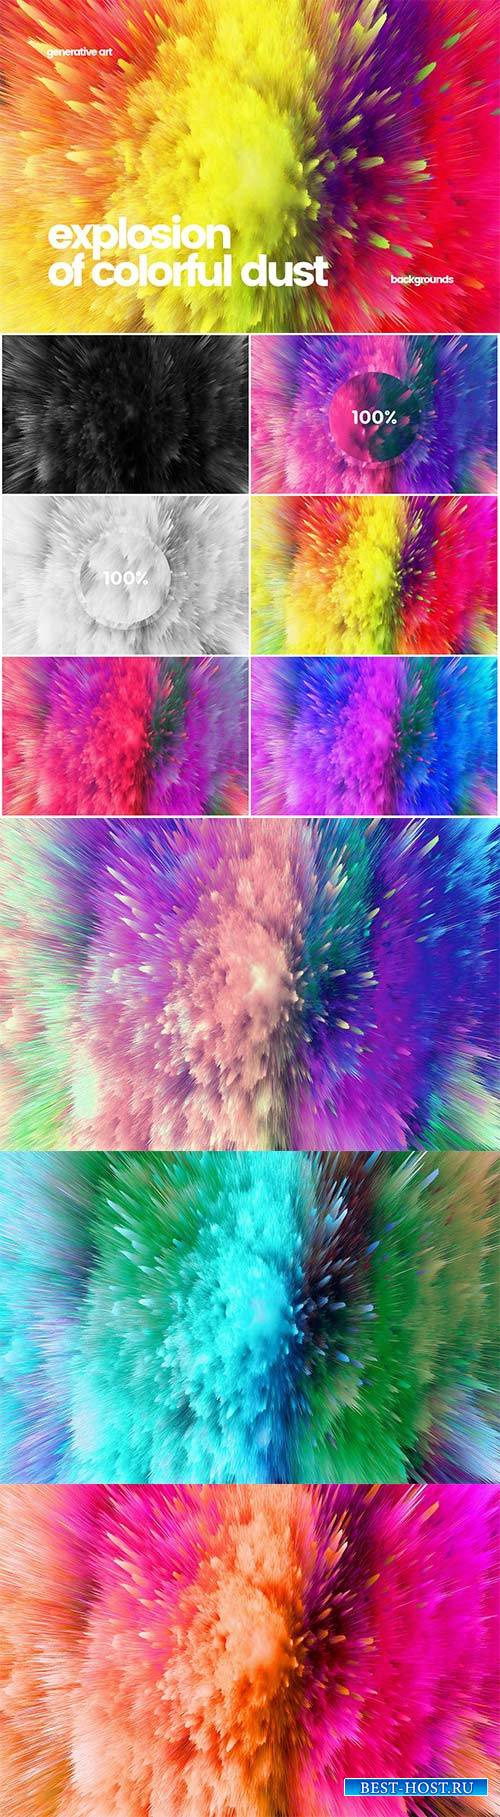 Explosion of Colorful Dust Backgrounds